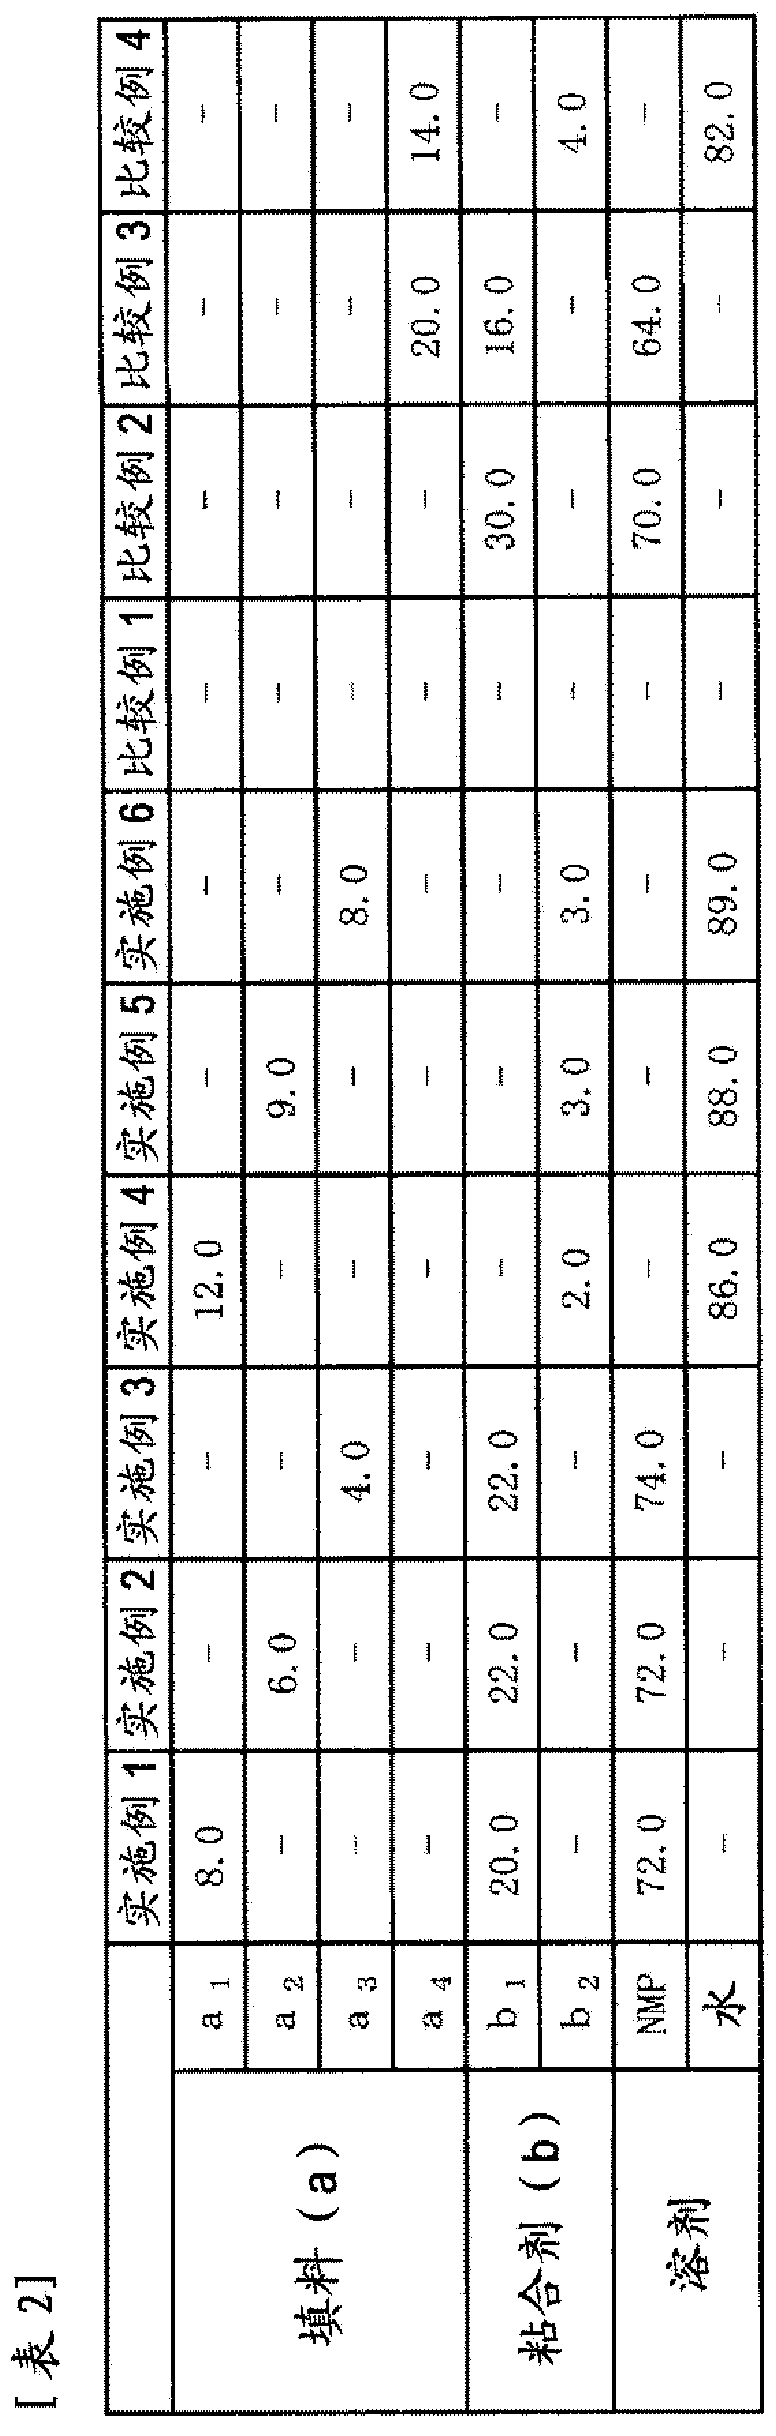 Multi-layered porous film, electrical cell separator, and electrical cell